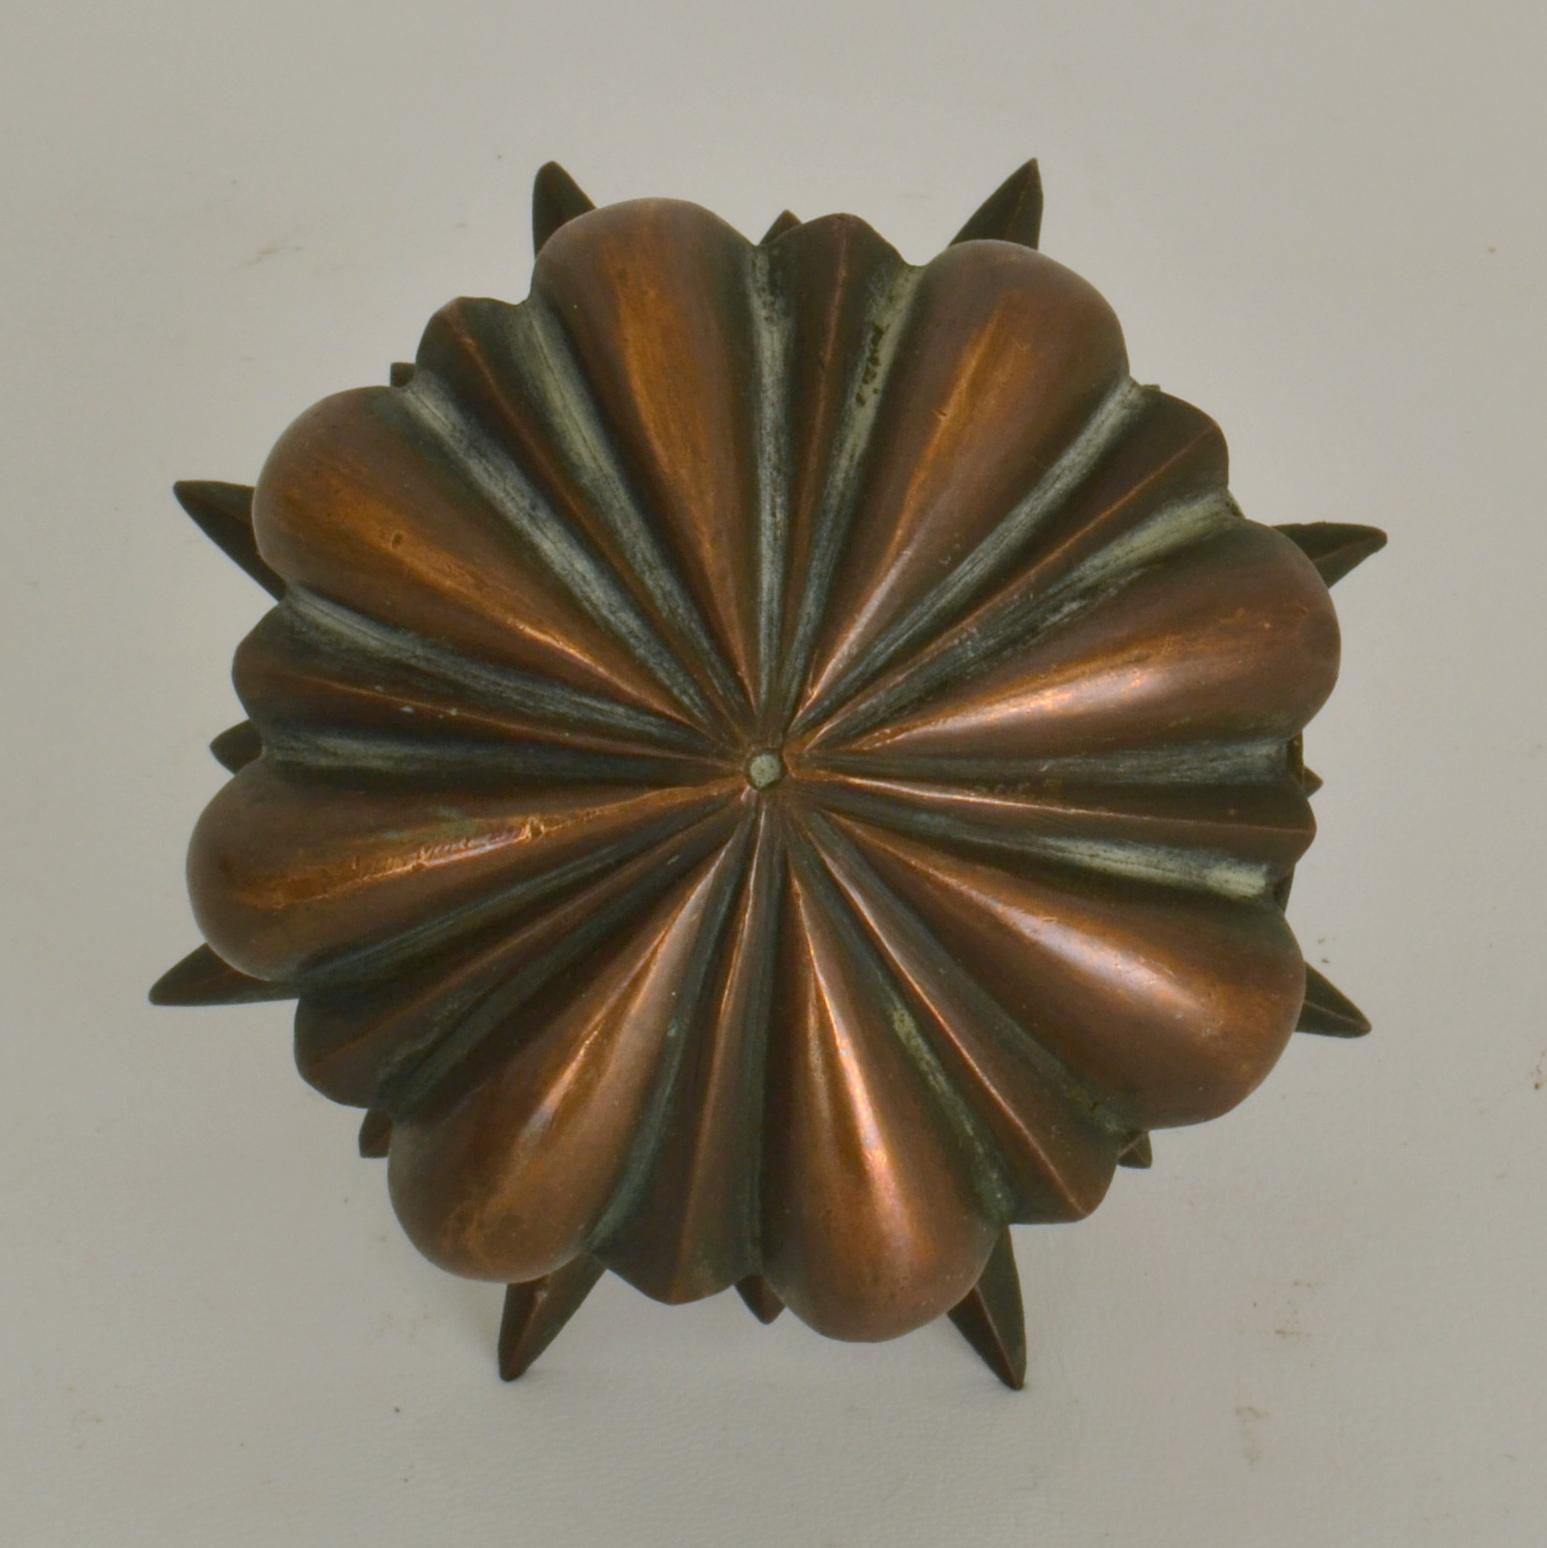 Classical round push and pull bronze door handle with star shape rosette to place on the center of the front door with original patina.
The handles attached to the doors a single fixing to the door with a standard bolts (not supplied) suiting the